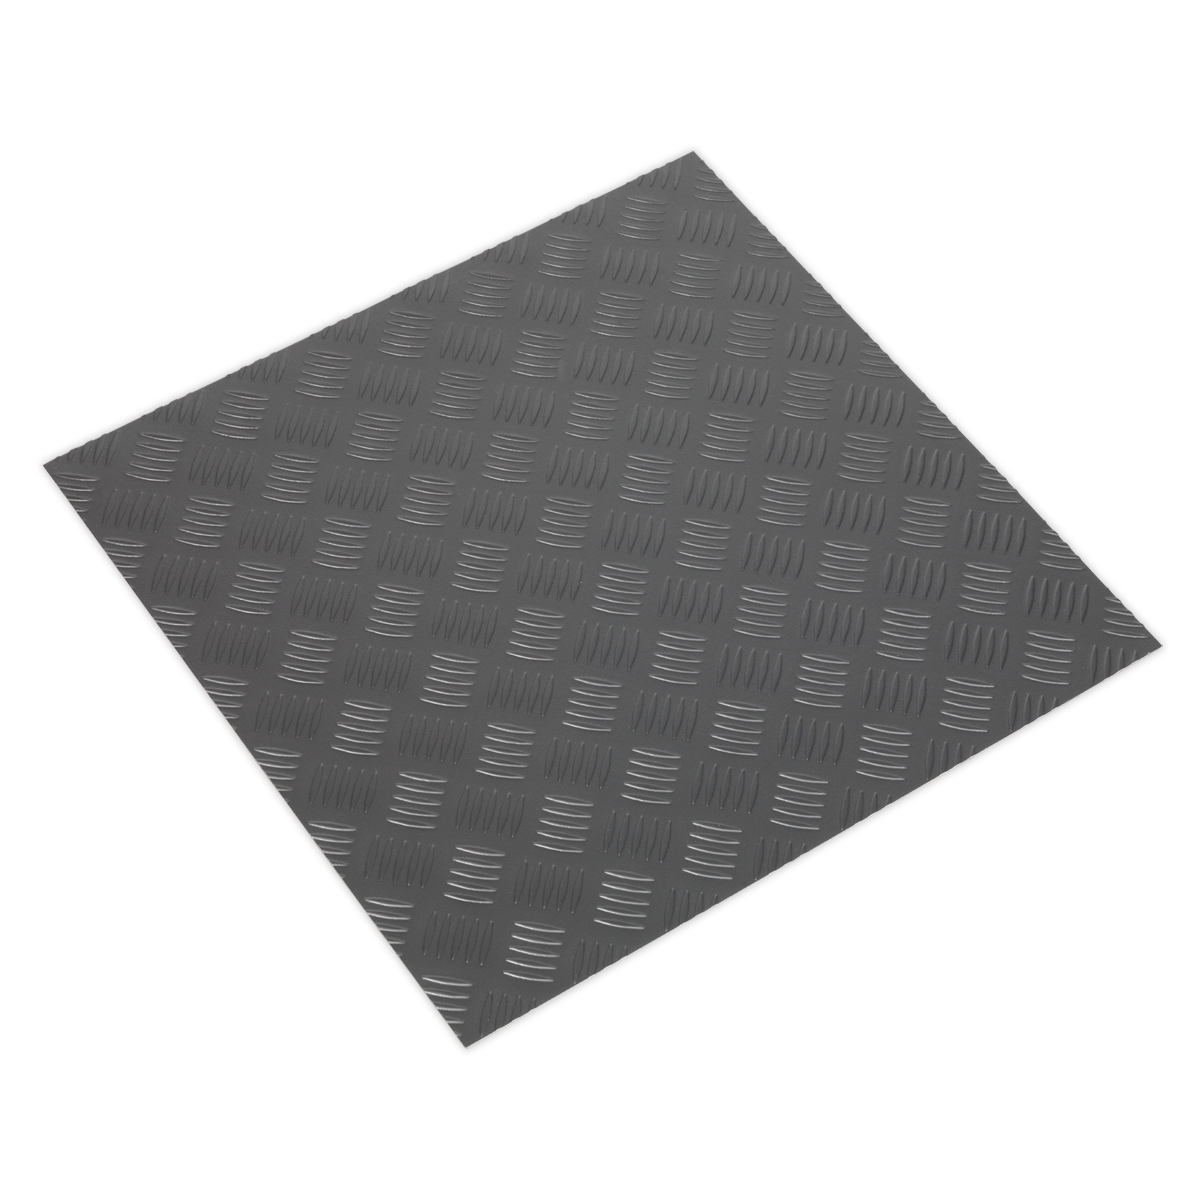 Vinyl Floor Tile with Peel & Stick Backing - Silver Treadplate Pack of 16 - FT1S - Farming Parts